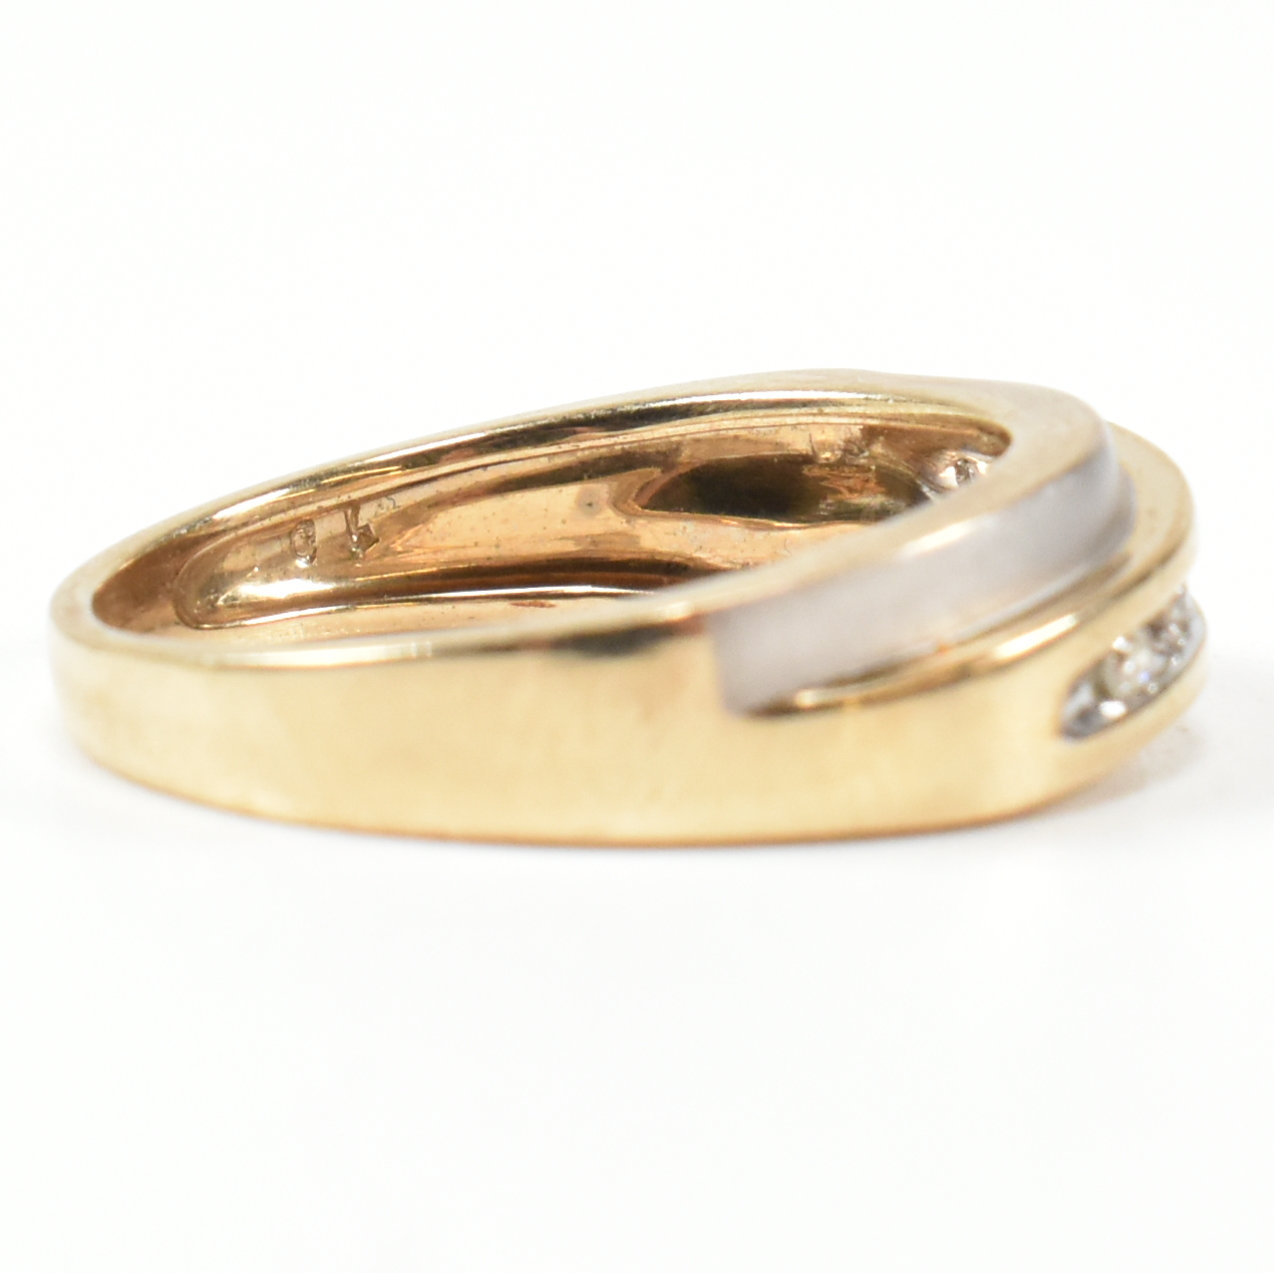 HALLMARKED 9CT GOLD & DIAMOND TWO TONE BAND RING - Image 5 of 9